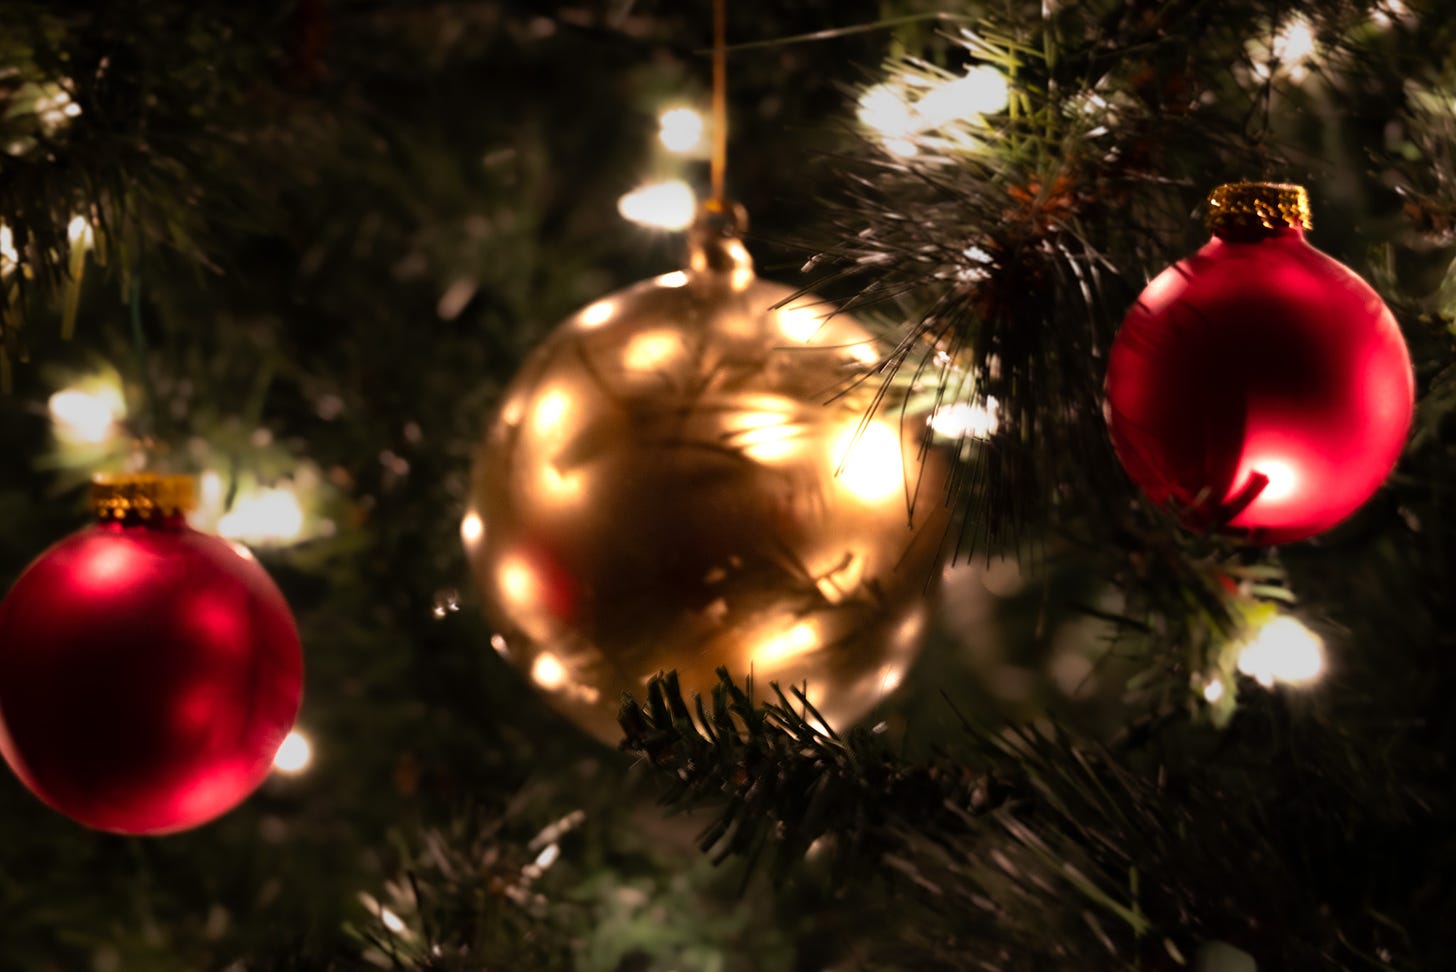 A close-up of a single gold ball ornament on a Christmas tree with a red ball on the right and left, small white lights on the tree sarkle in the background